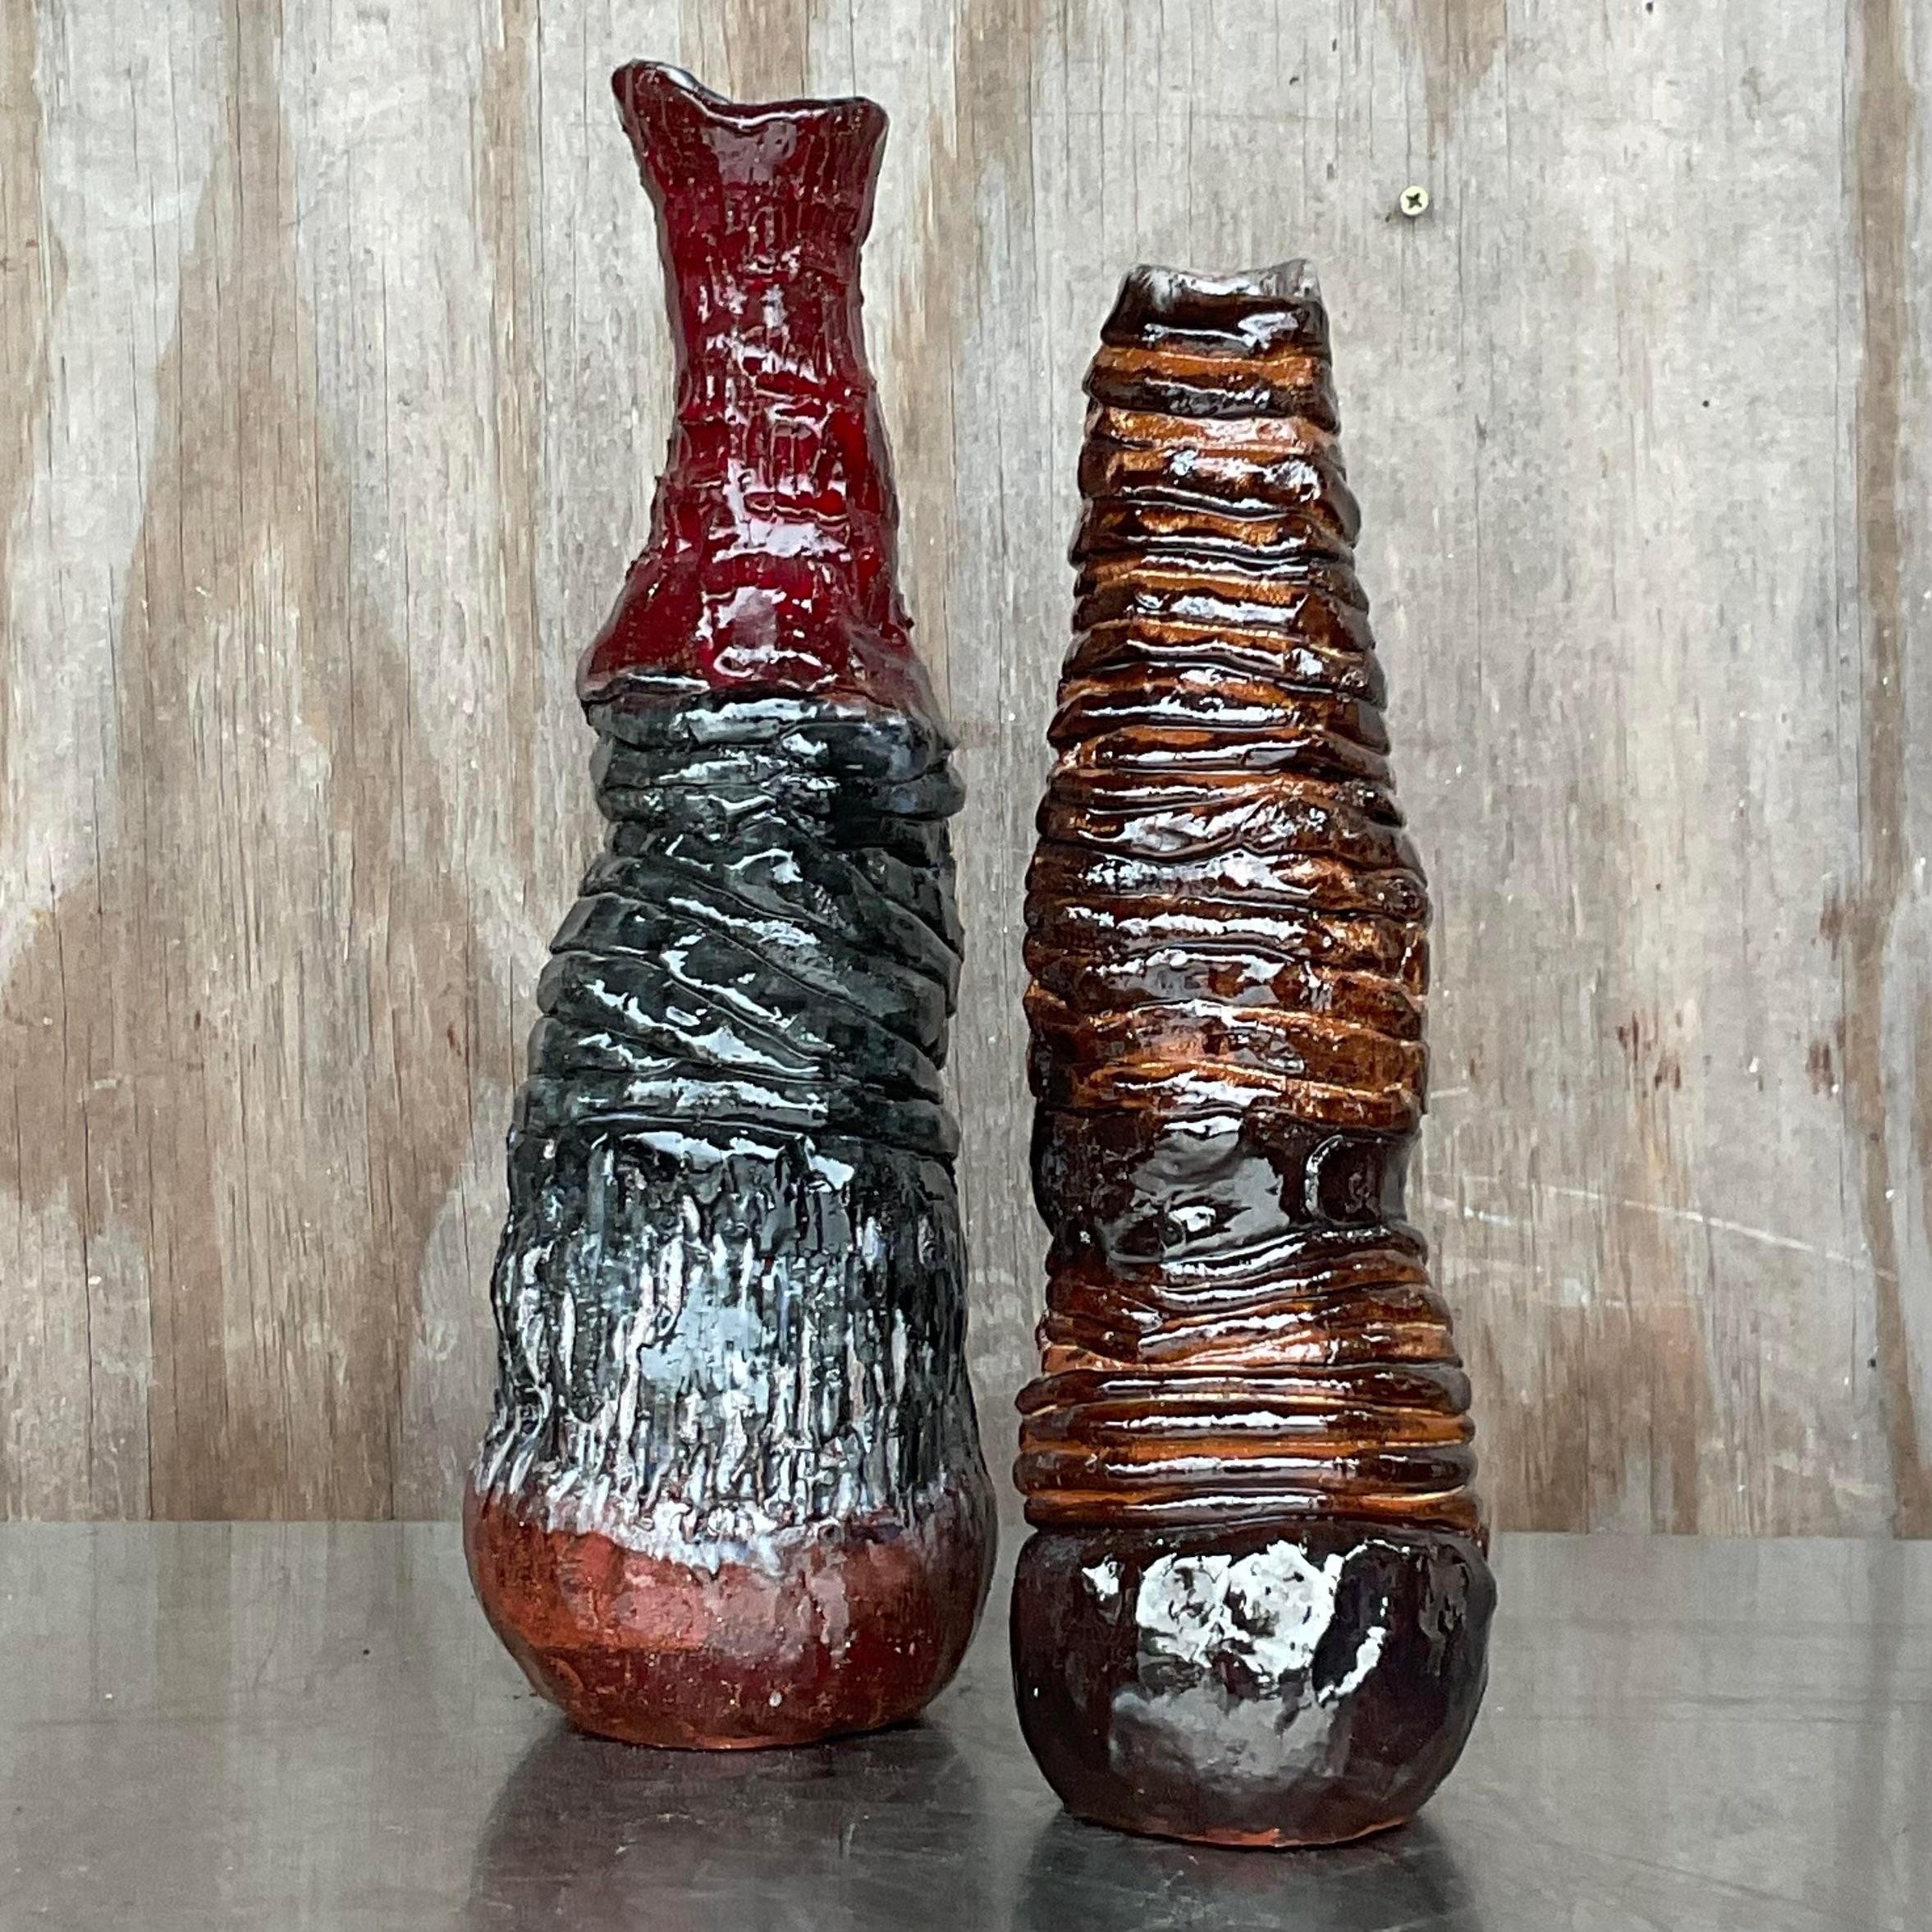 A fantastic pair of Boho Studio pottery vases. Beautiful hand made pieces in beautiful warm colors. Signed by the artist. Acquired from a NY estate.